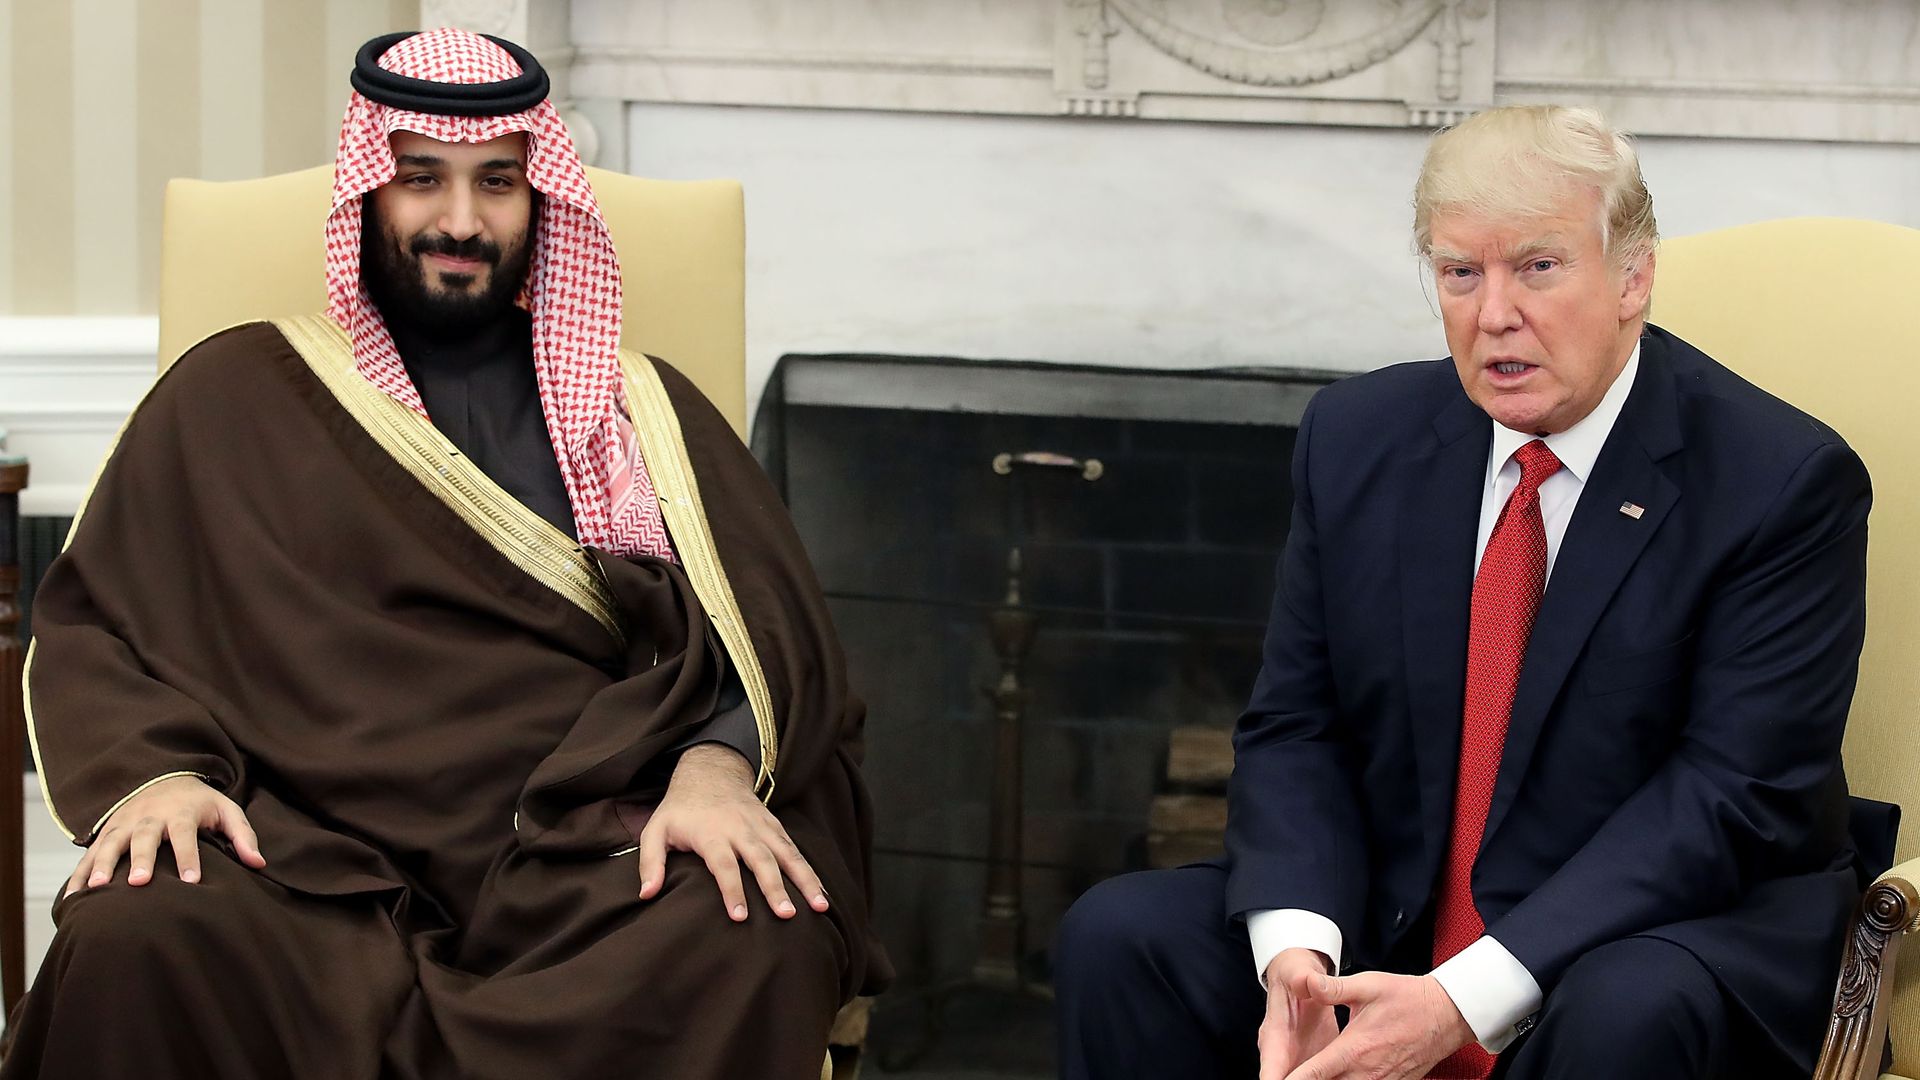 President Donald Trump (R) meets with Mohammed bin Salman, Deputy Crown Prince and Minister of Defense of the Kingdom of Saudi Arabia